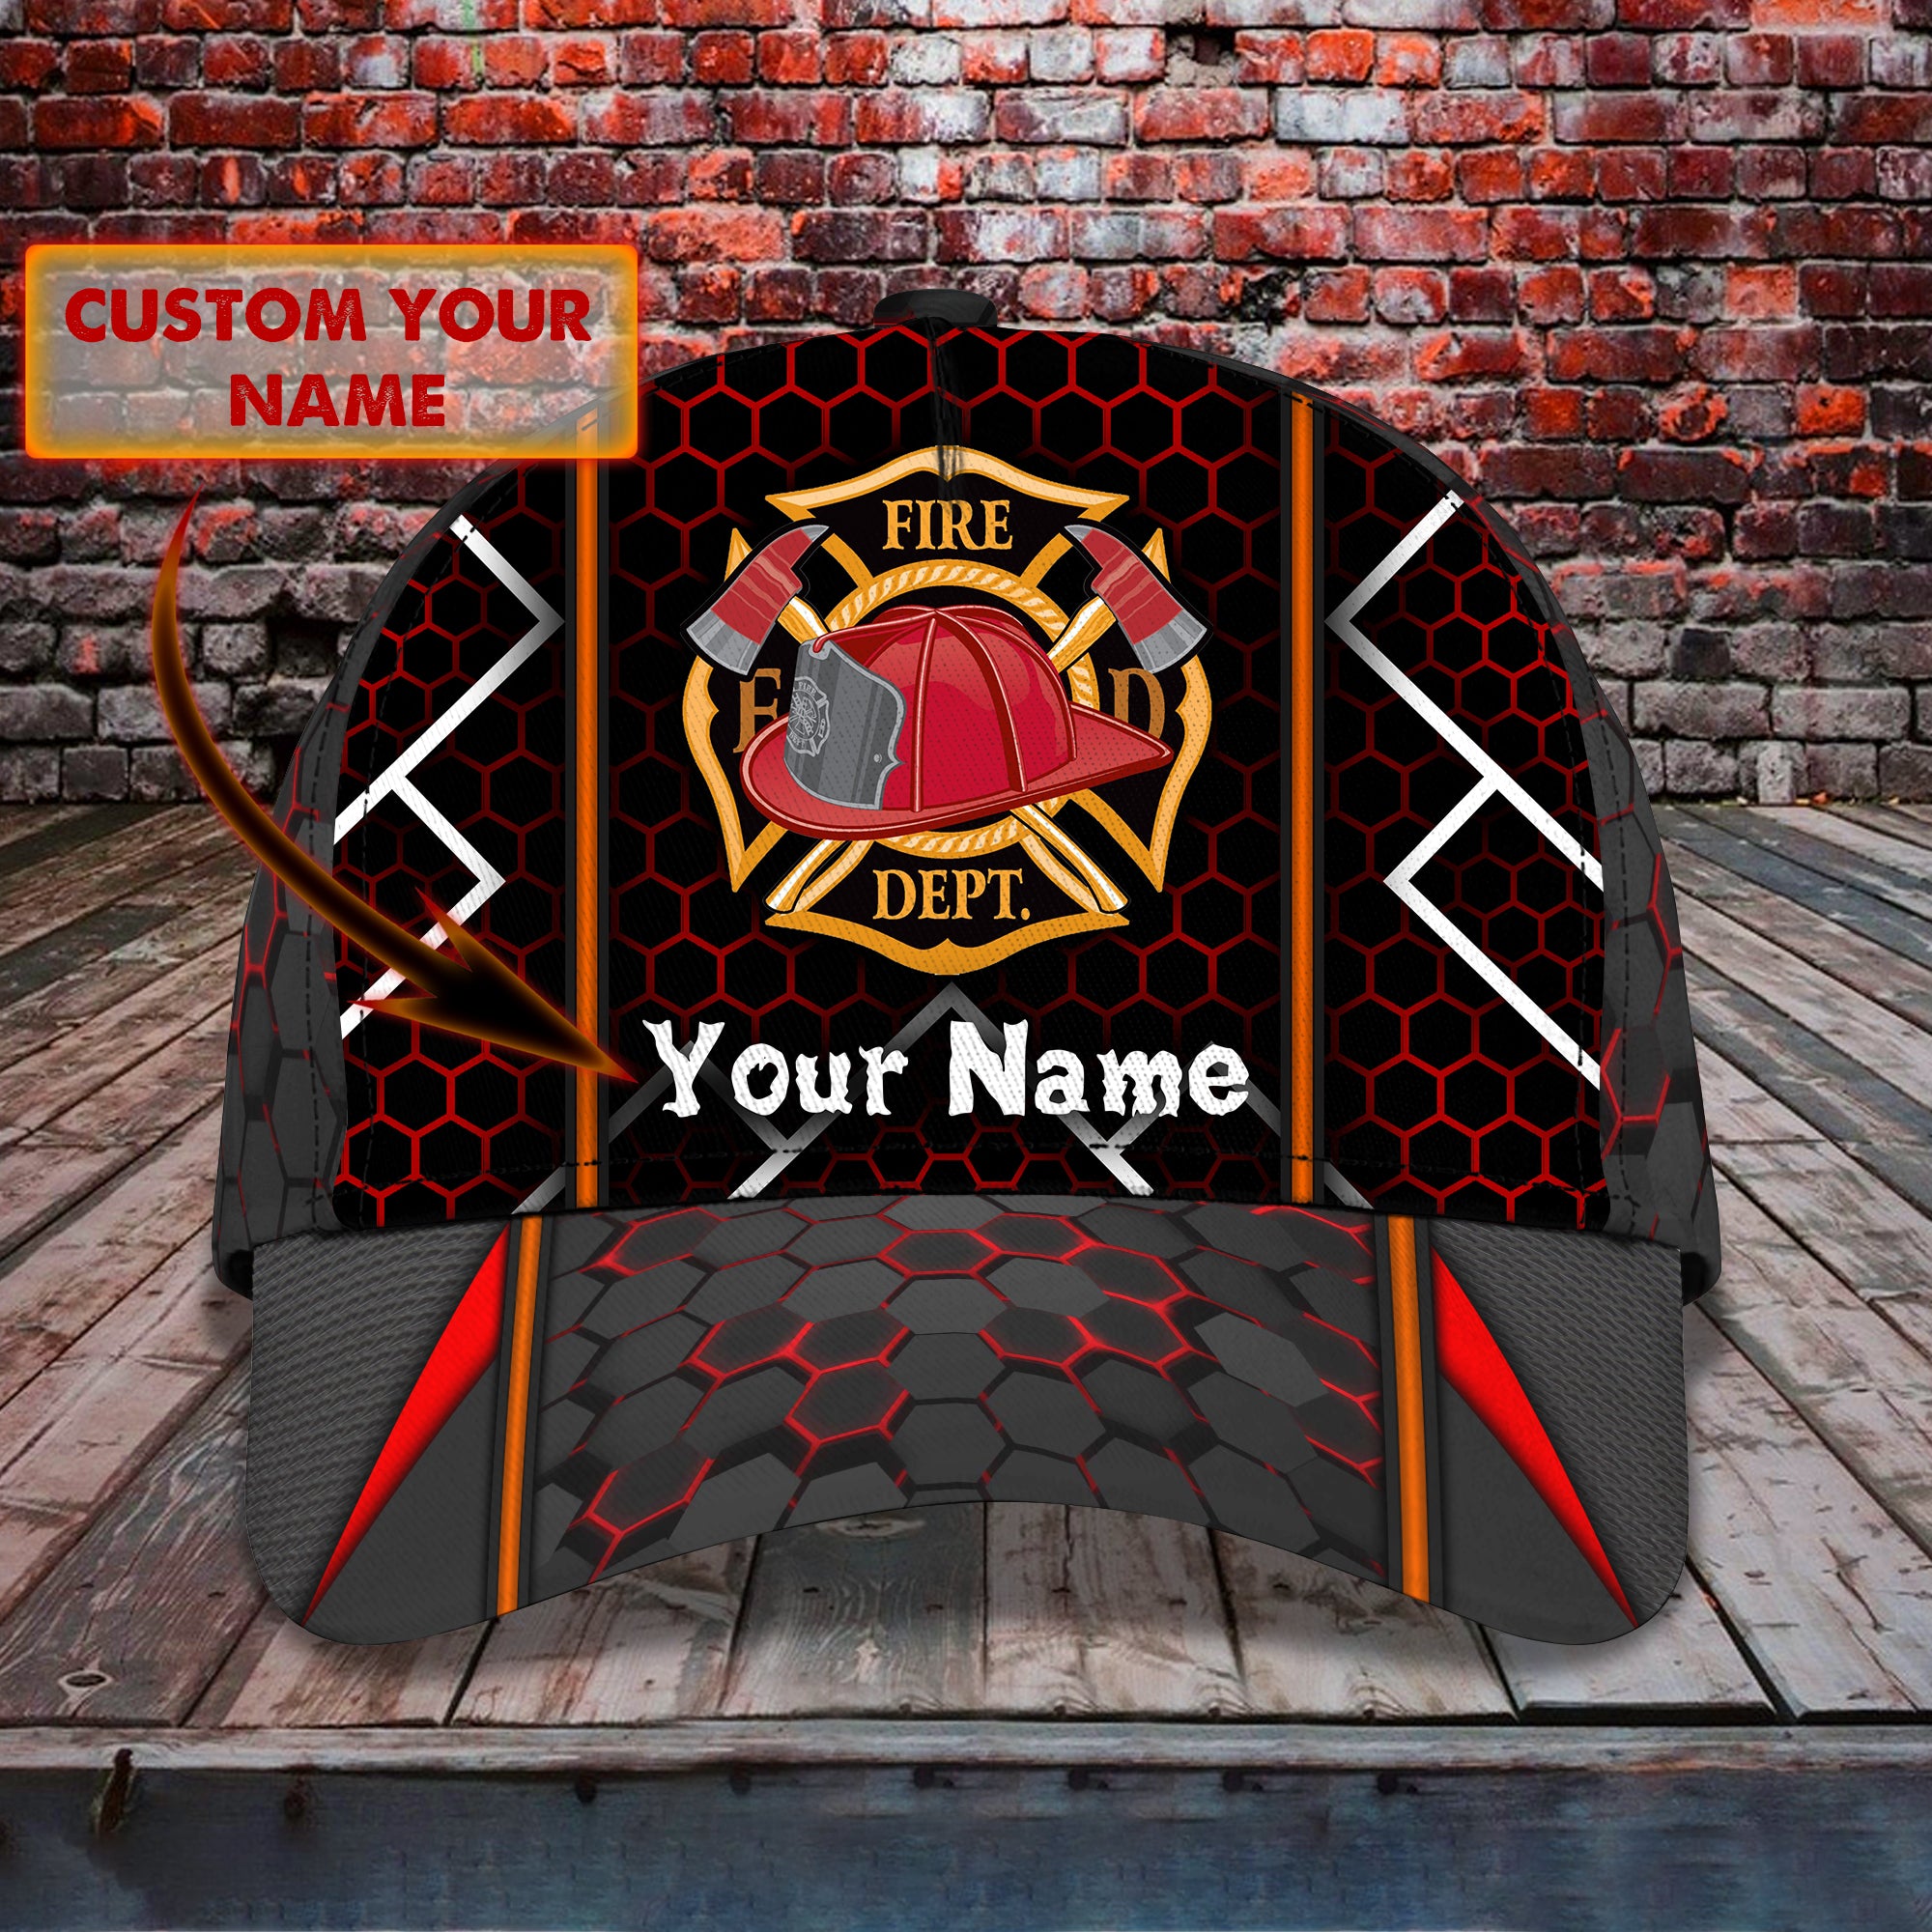 Firefighter - Personalized Name Cap - Urt96